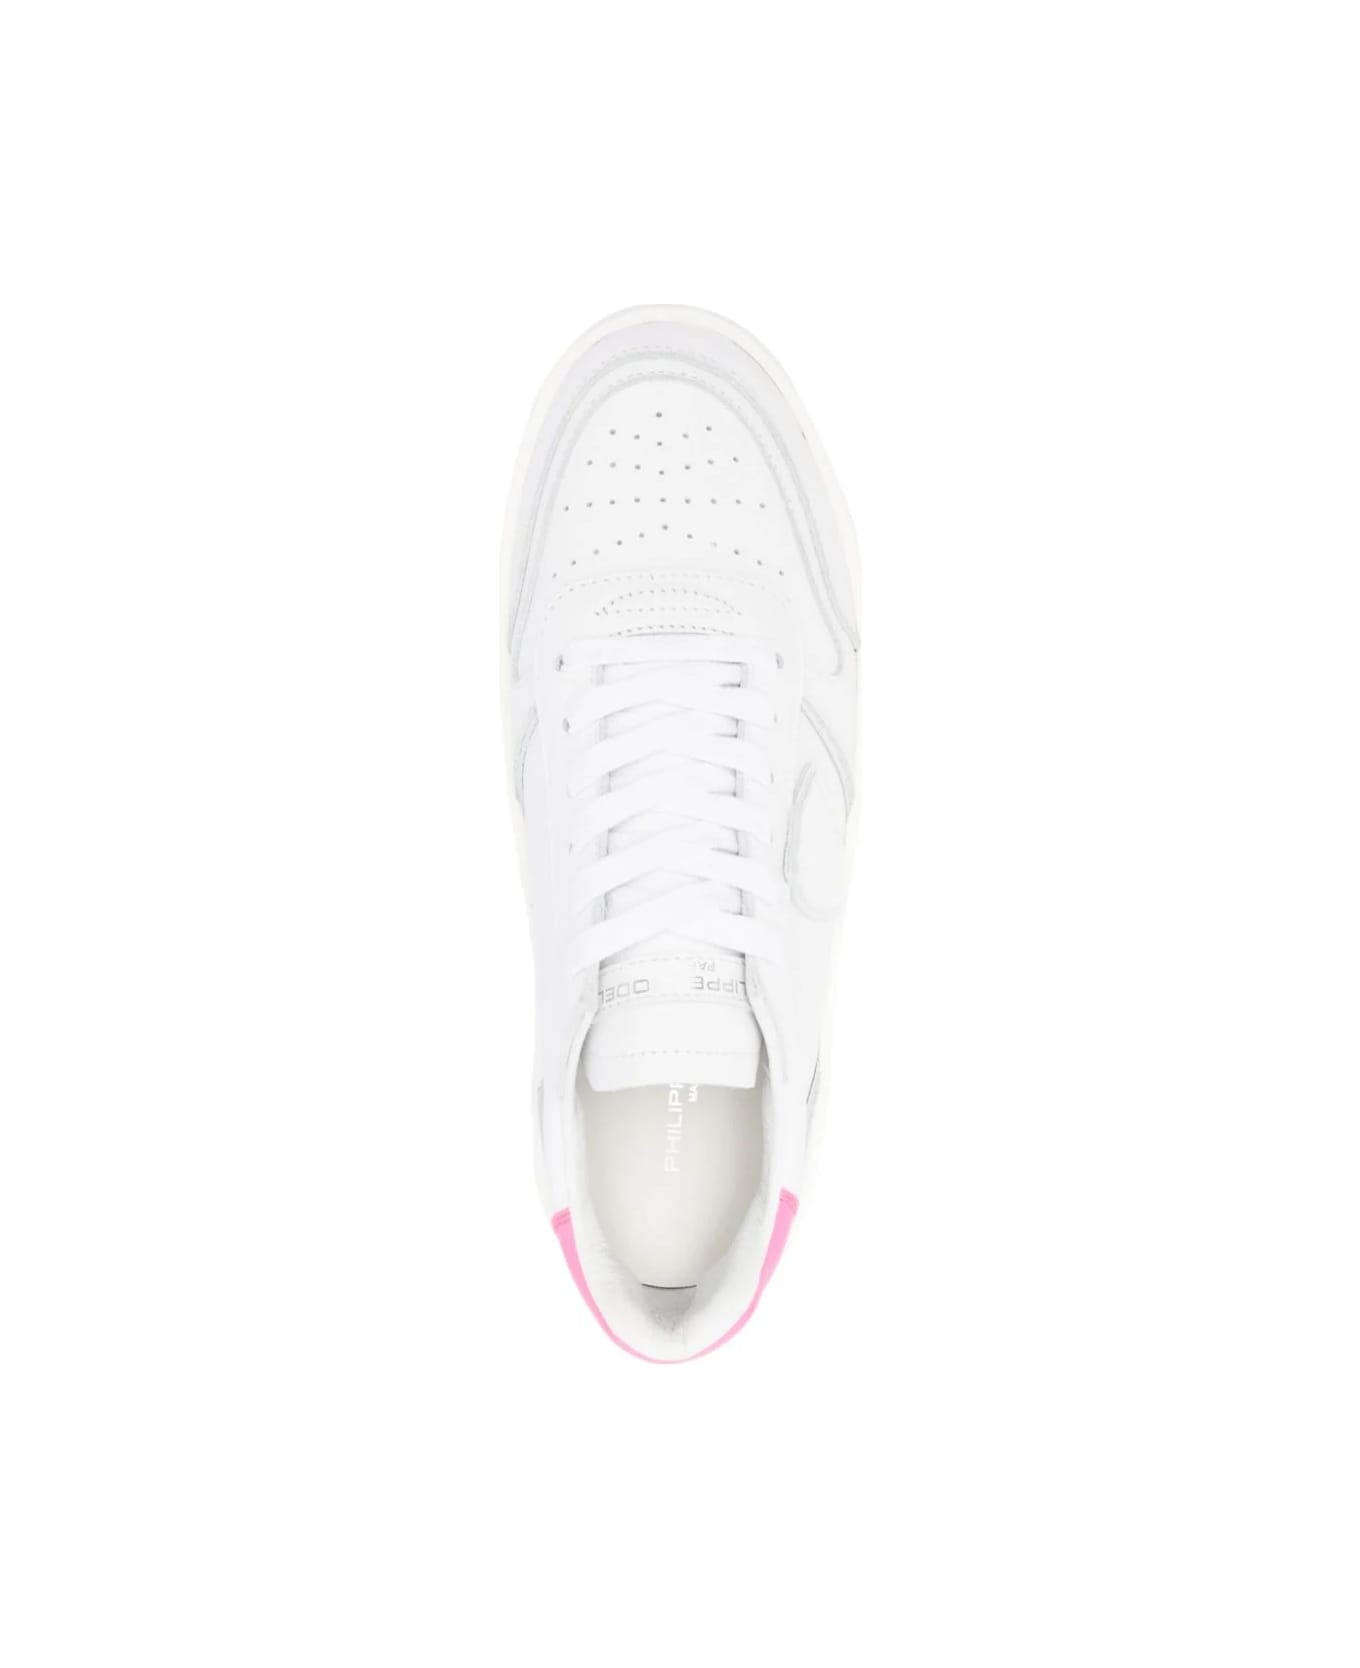 Philippe Model Nice Low Sneakers - White And Fuchsia - White スニーカー